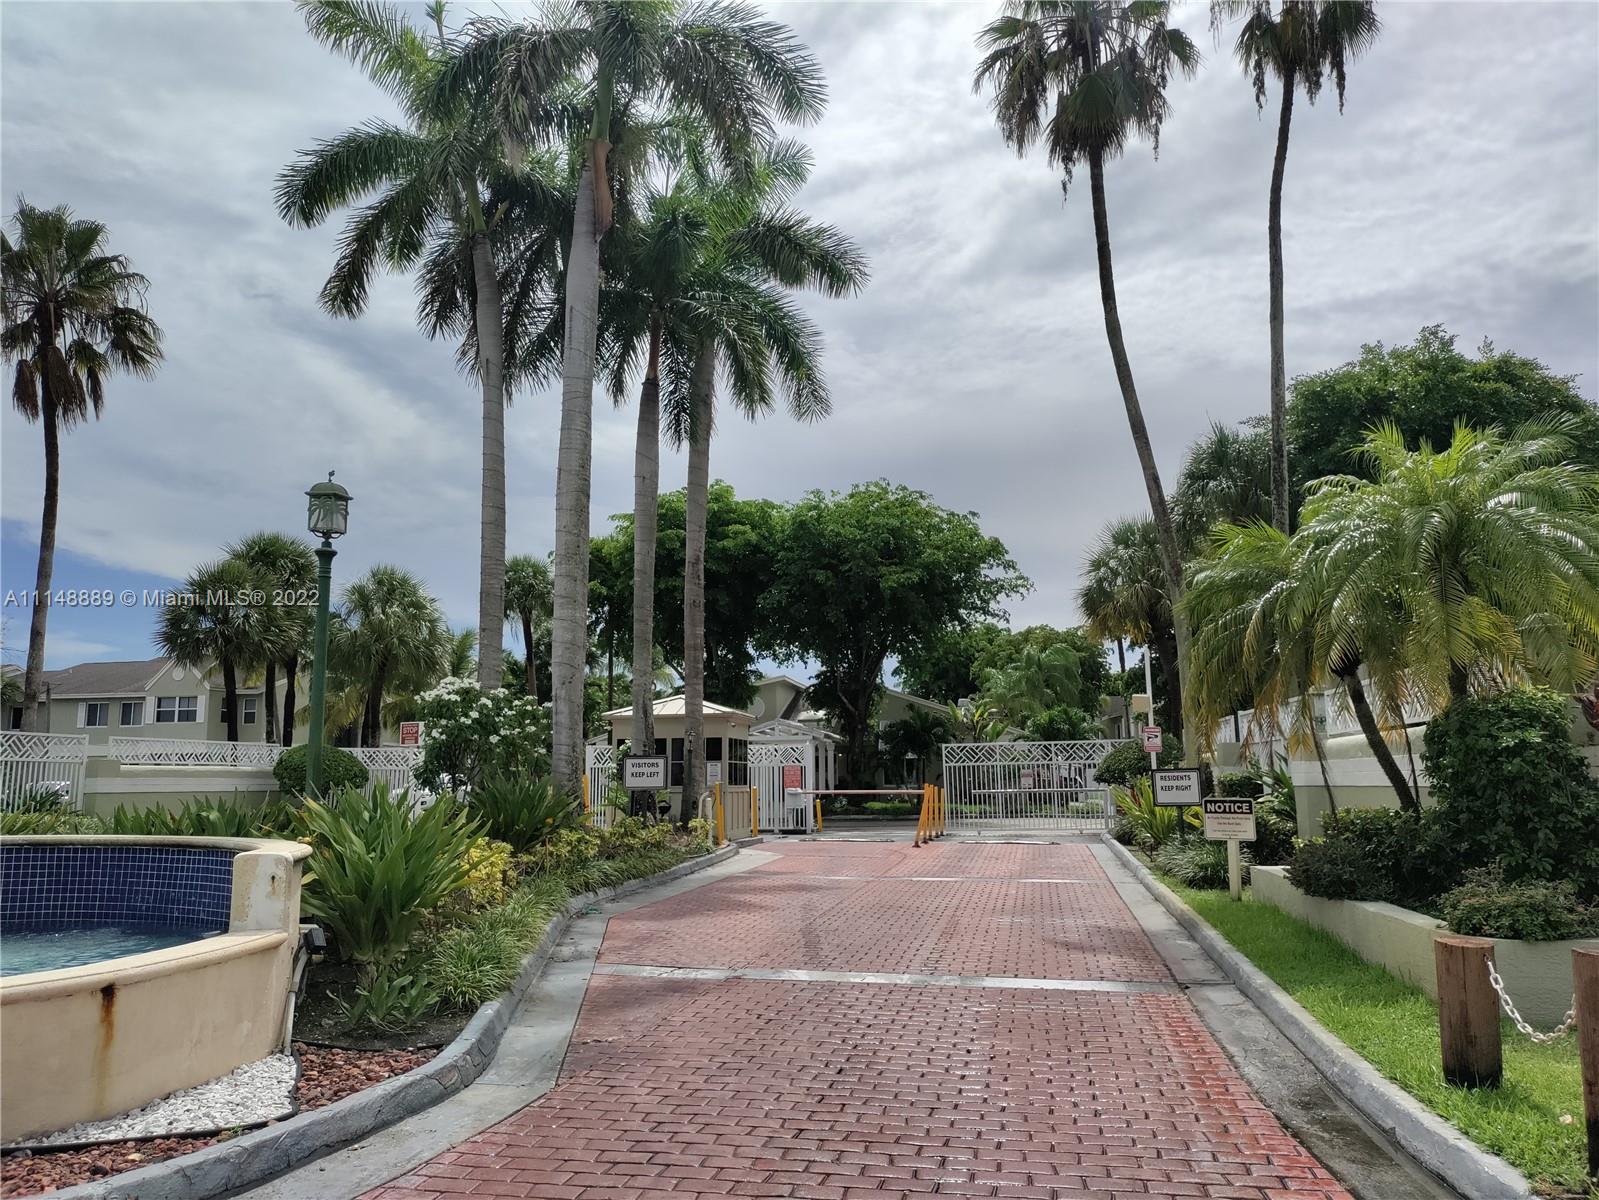 a view of outdoor space with palm trees